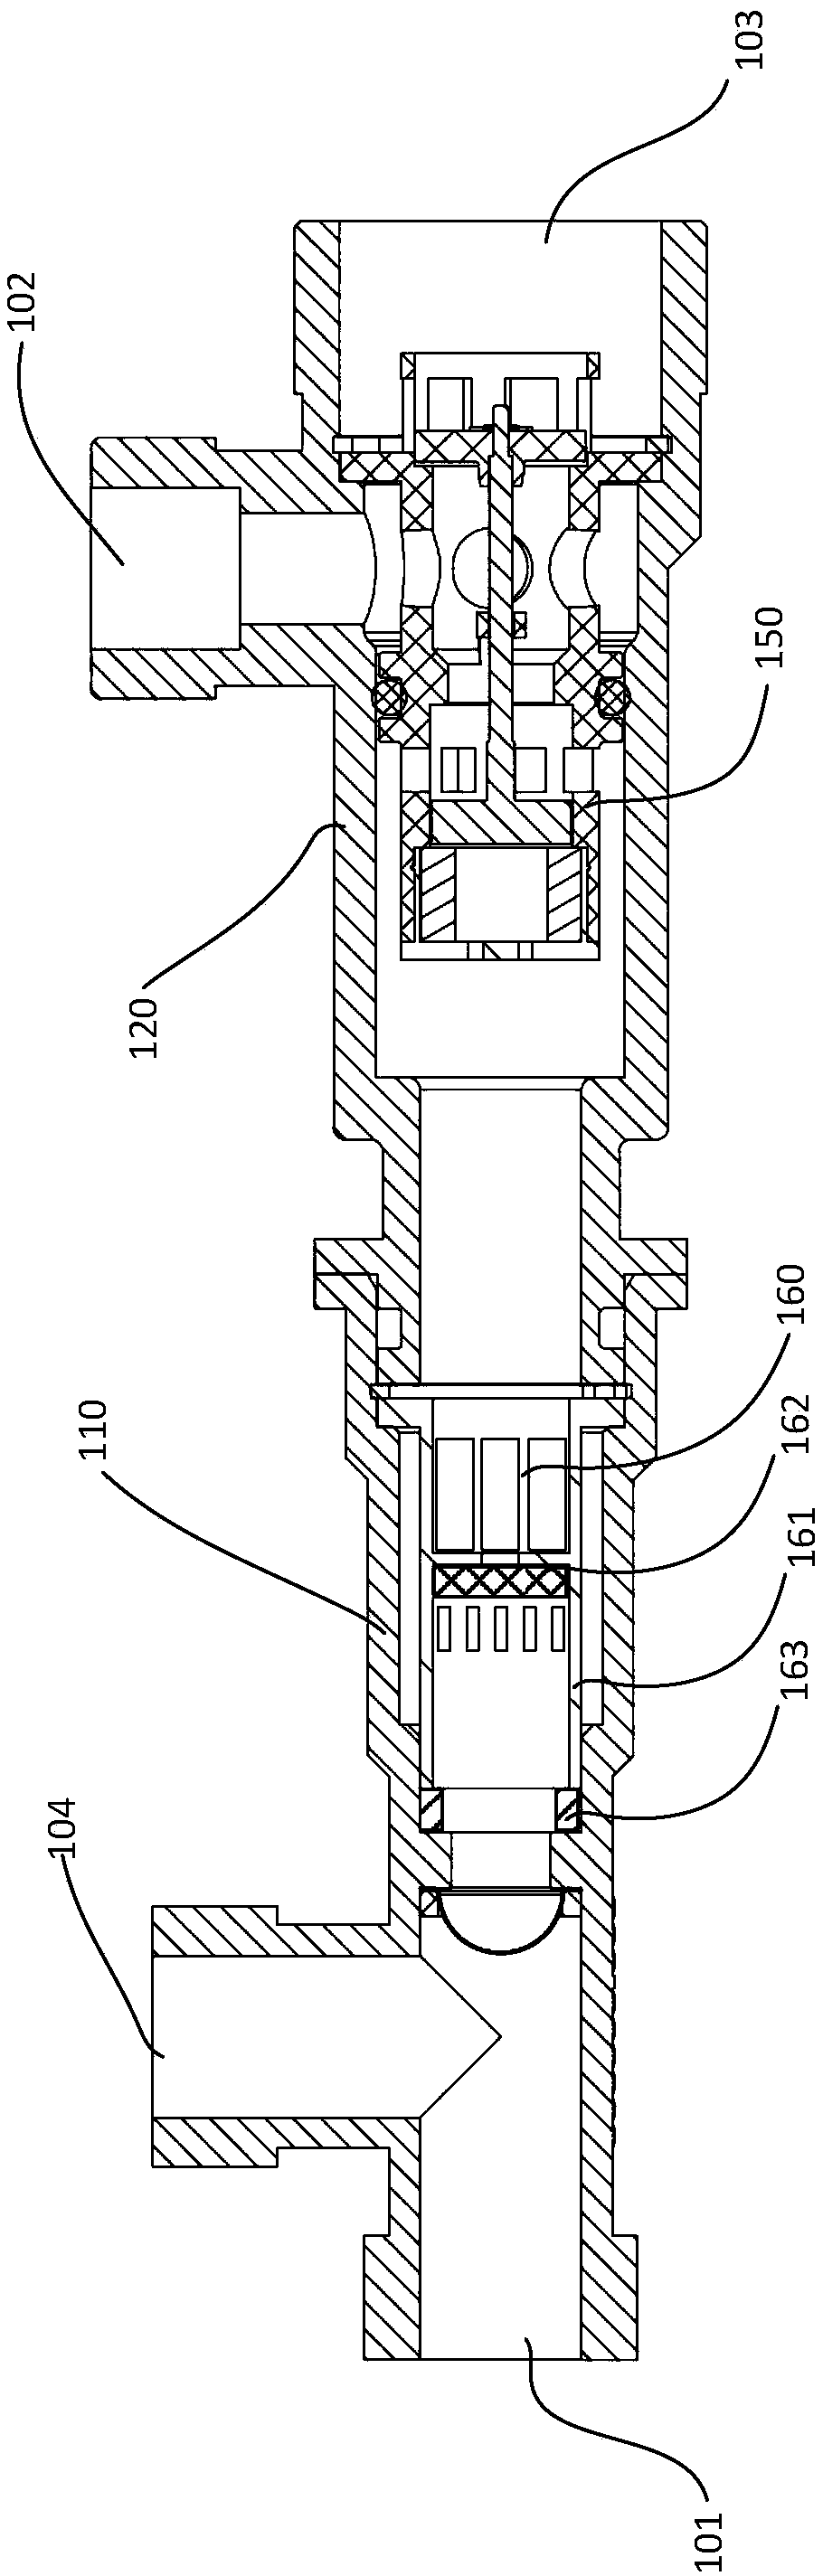 Valve and hot water system thereof